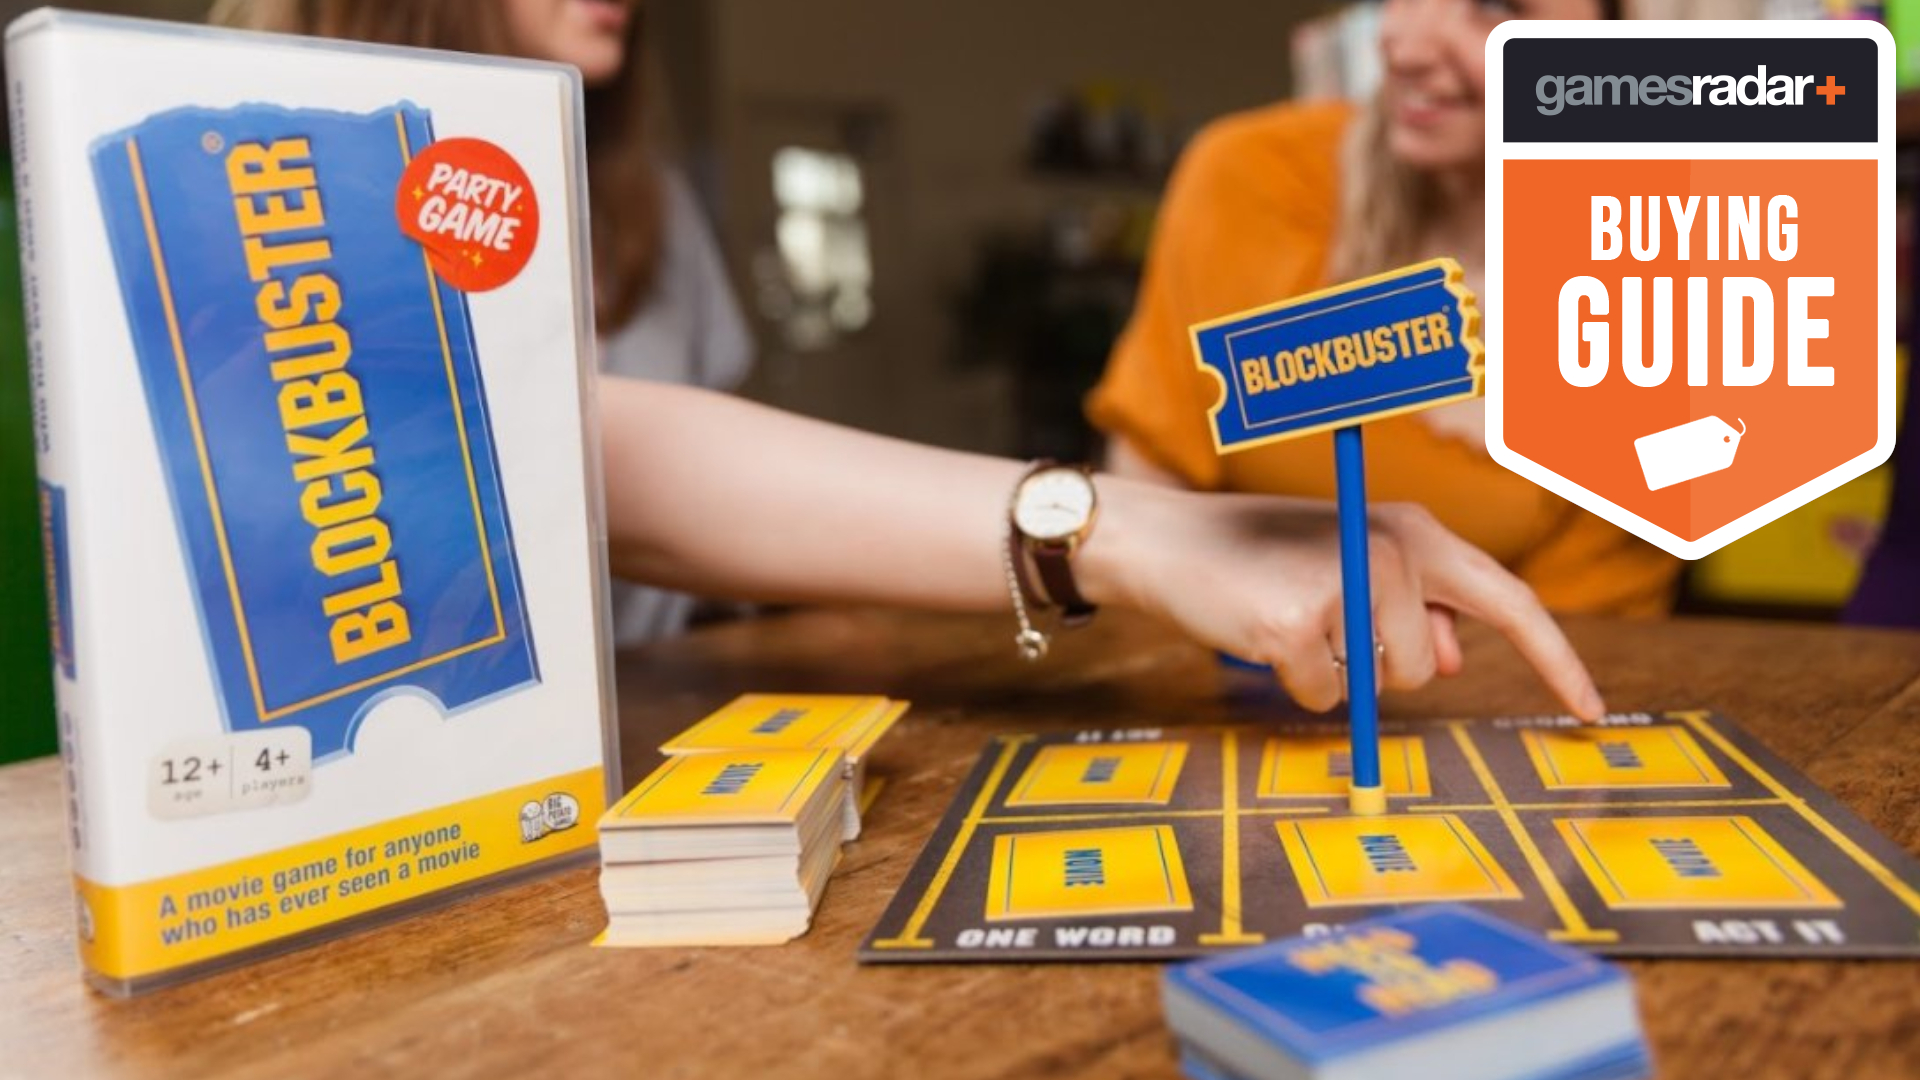 Classic board games you can play with your friends and family